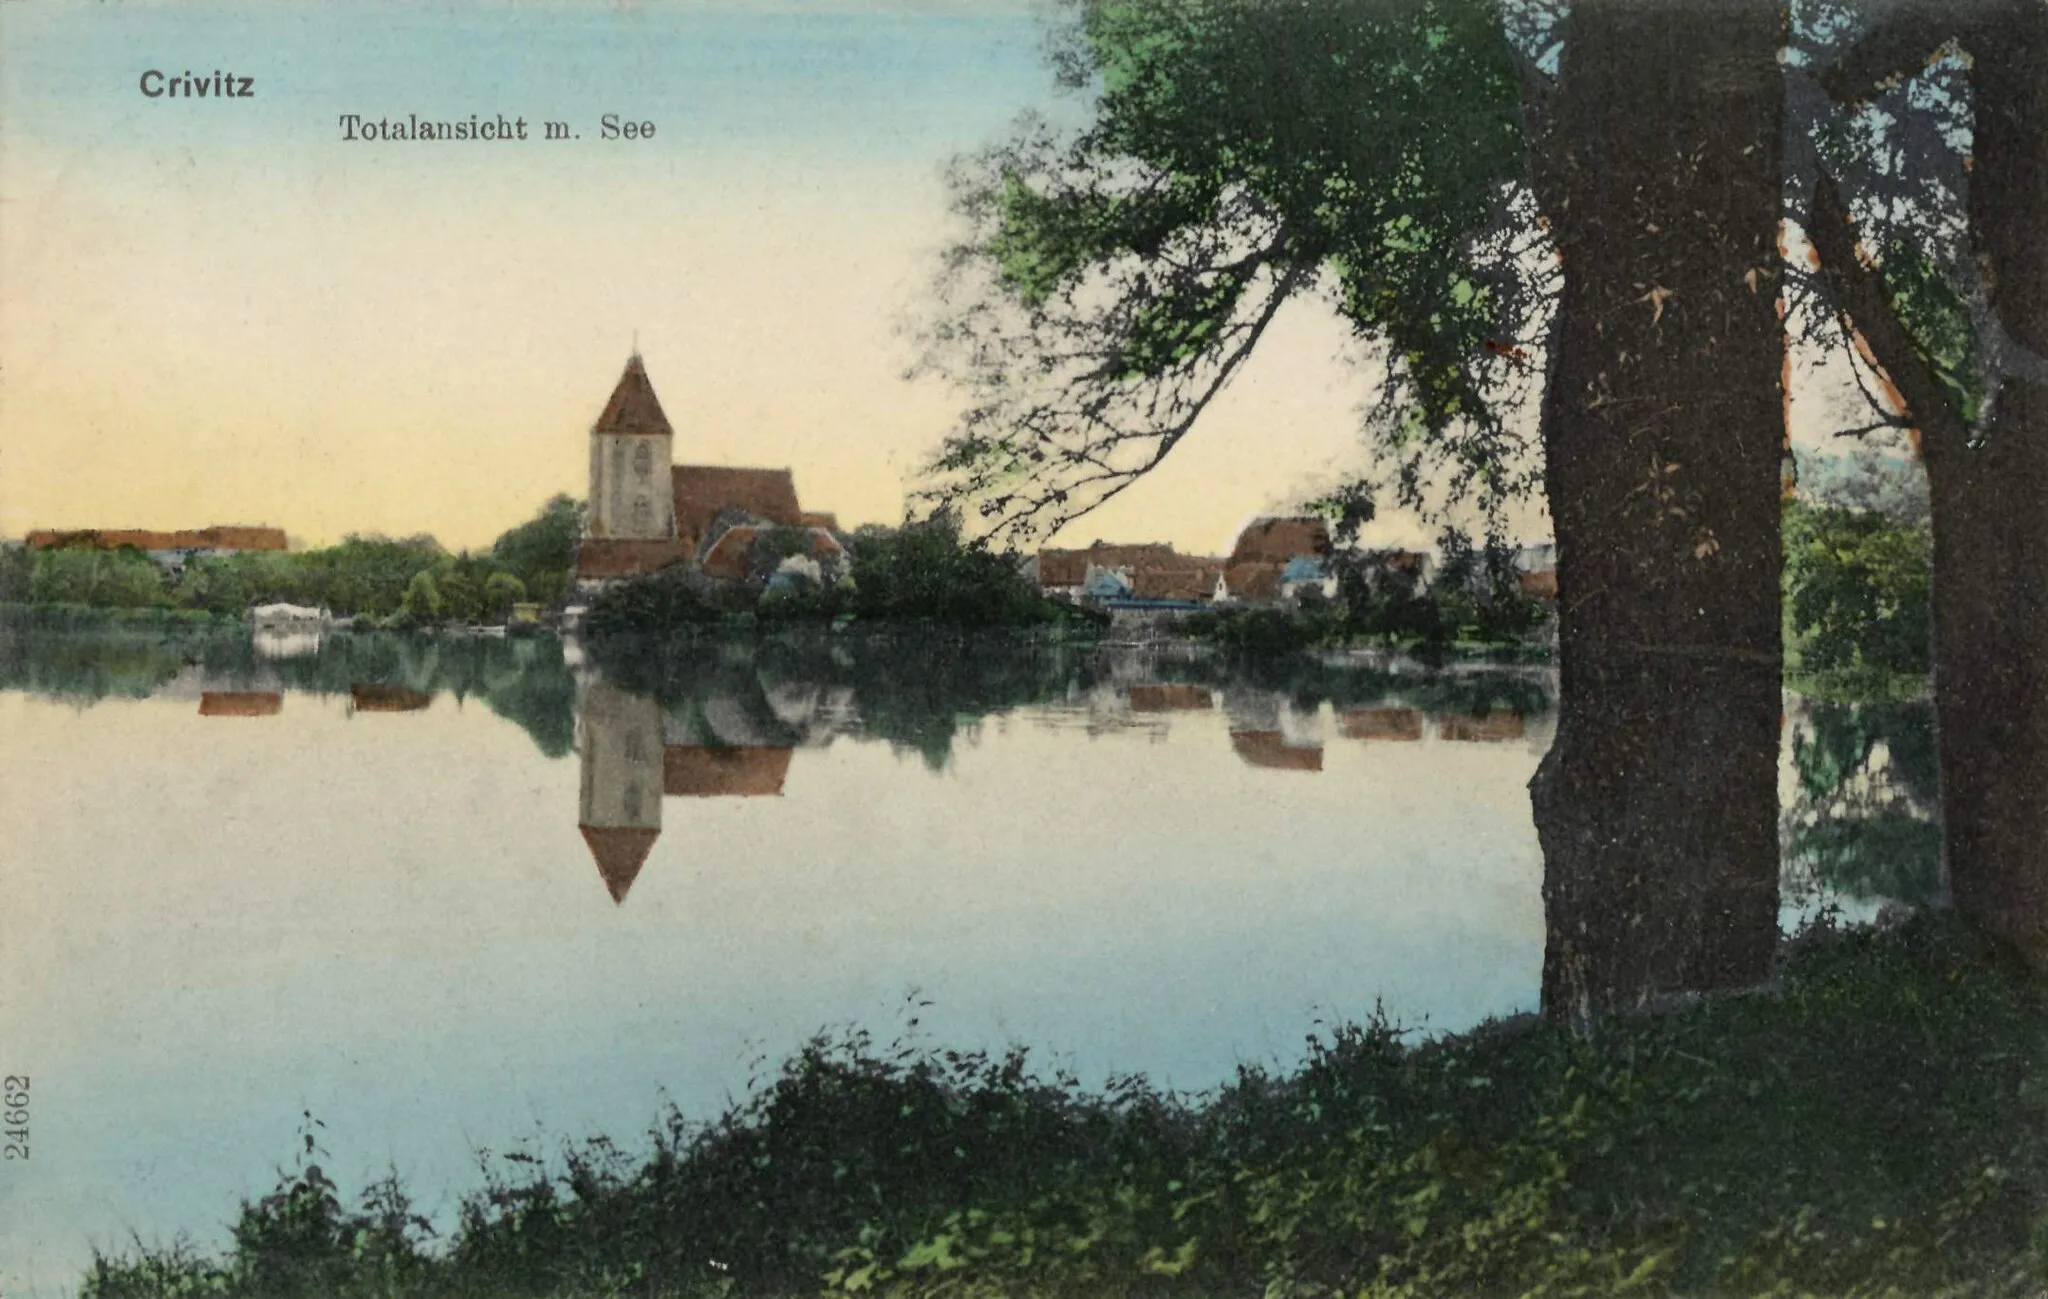 Photo showing: Postcard from 1913 showing Crivitz and the nearby lake.